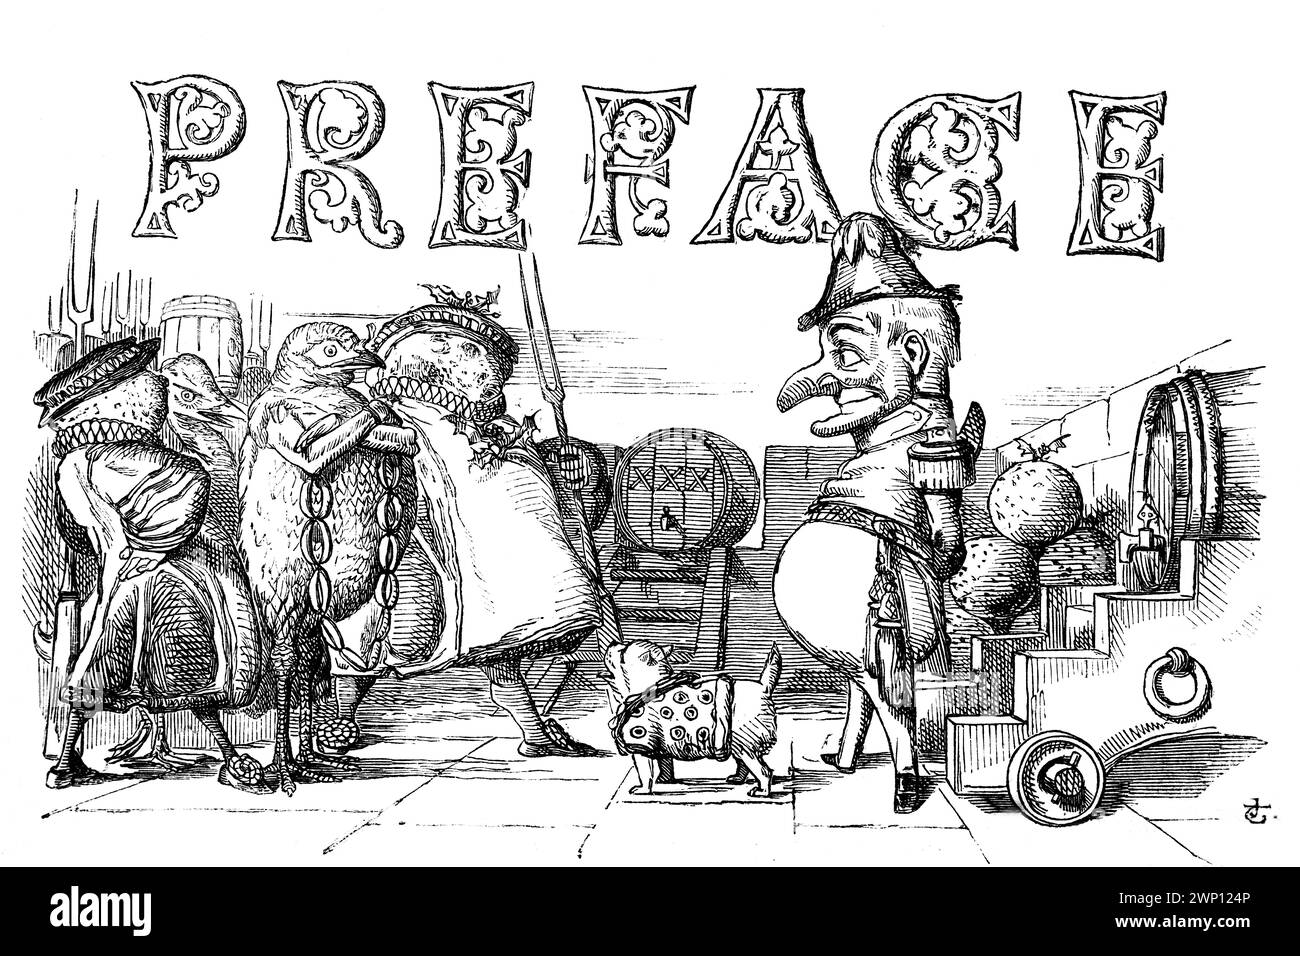 1852 preface illustration of Mr Punch by John Tenniel, from of Punch Magazine Volume XXIII Stock Photo